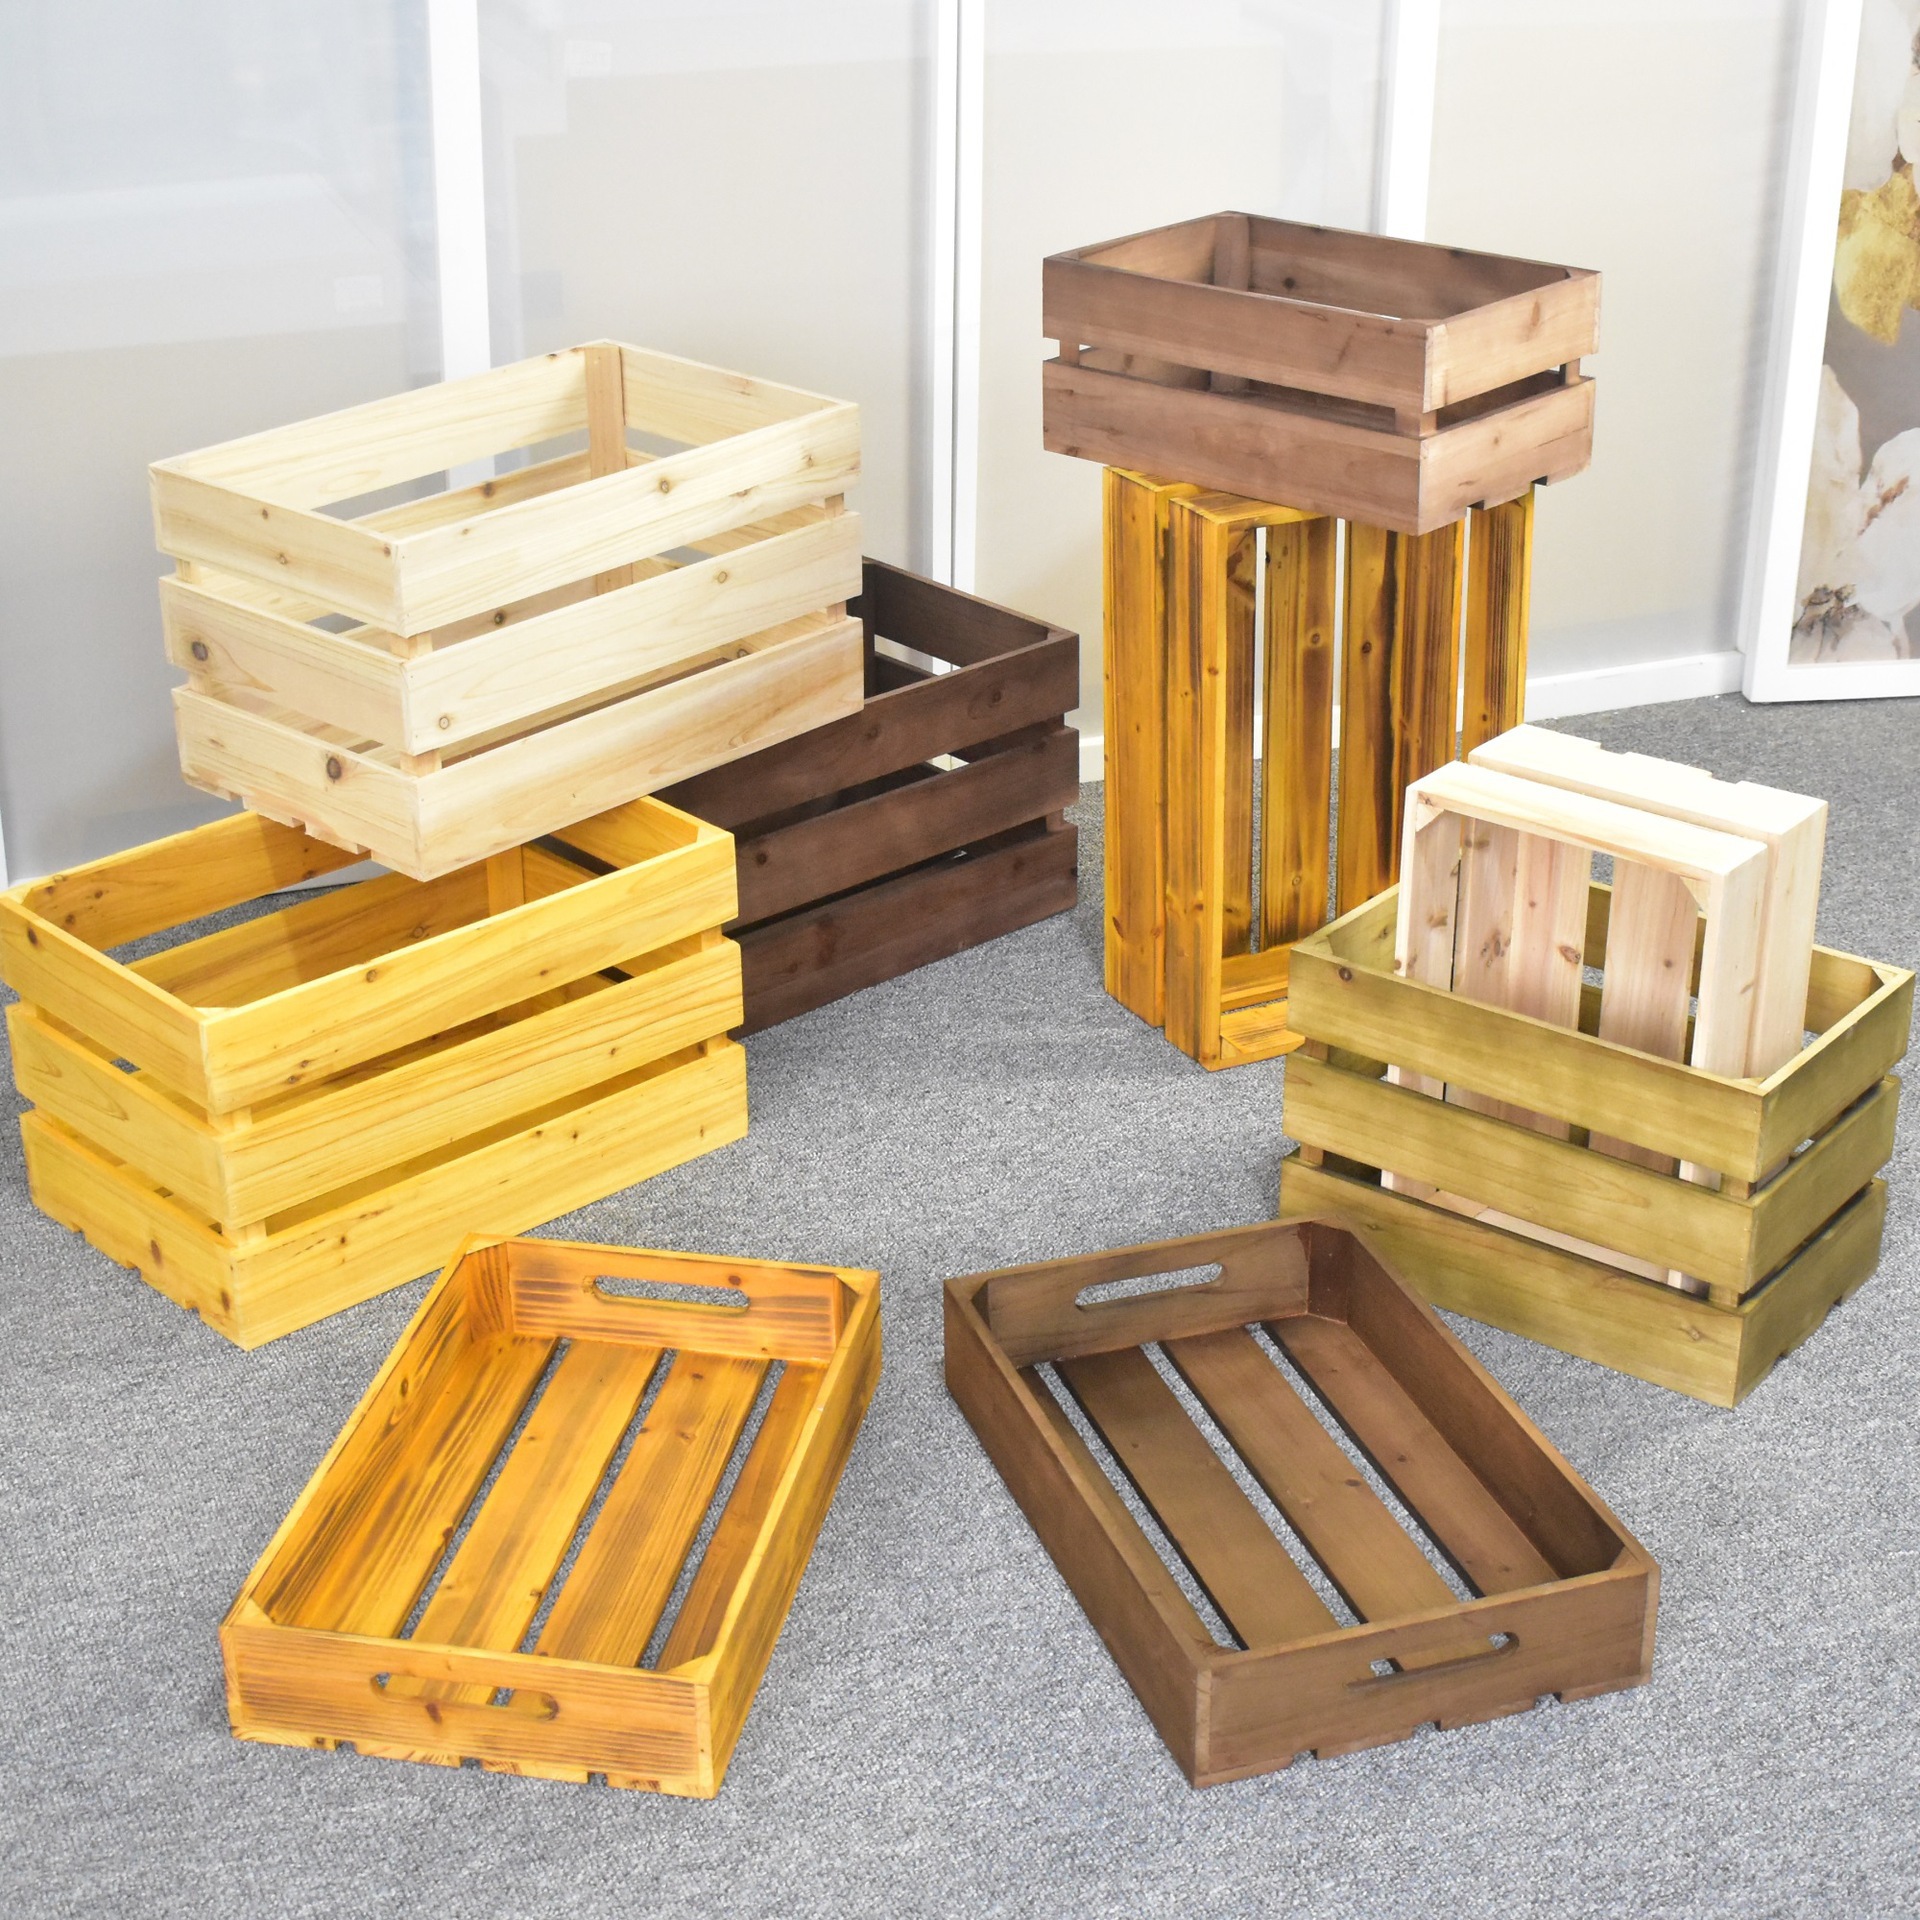 Solid Wood Storage Basket Outdoor Retro Wooden Box Decoration Supermarket Pile Head Wooden Box Display Box Wooden Frame Boxes of Fruit Display Basket